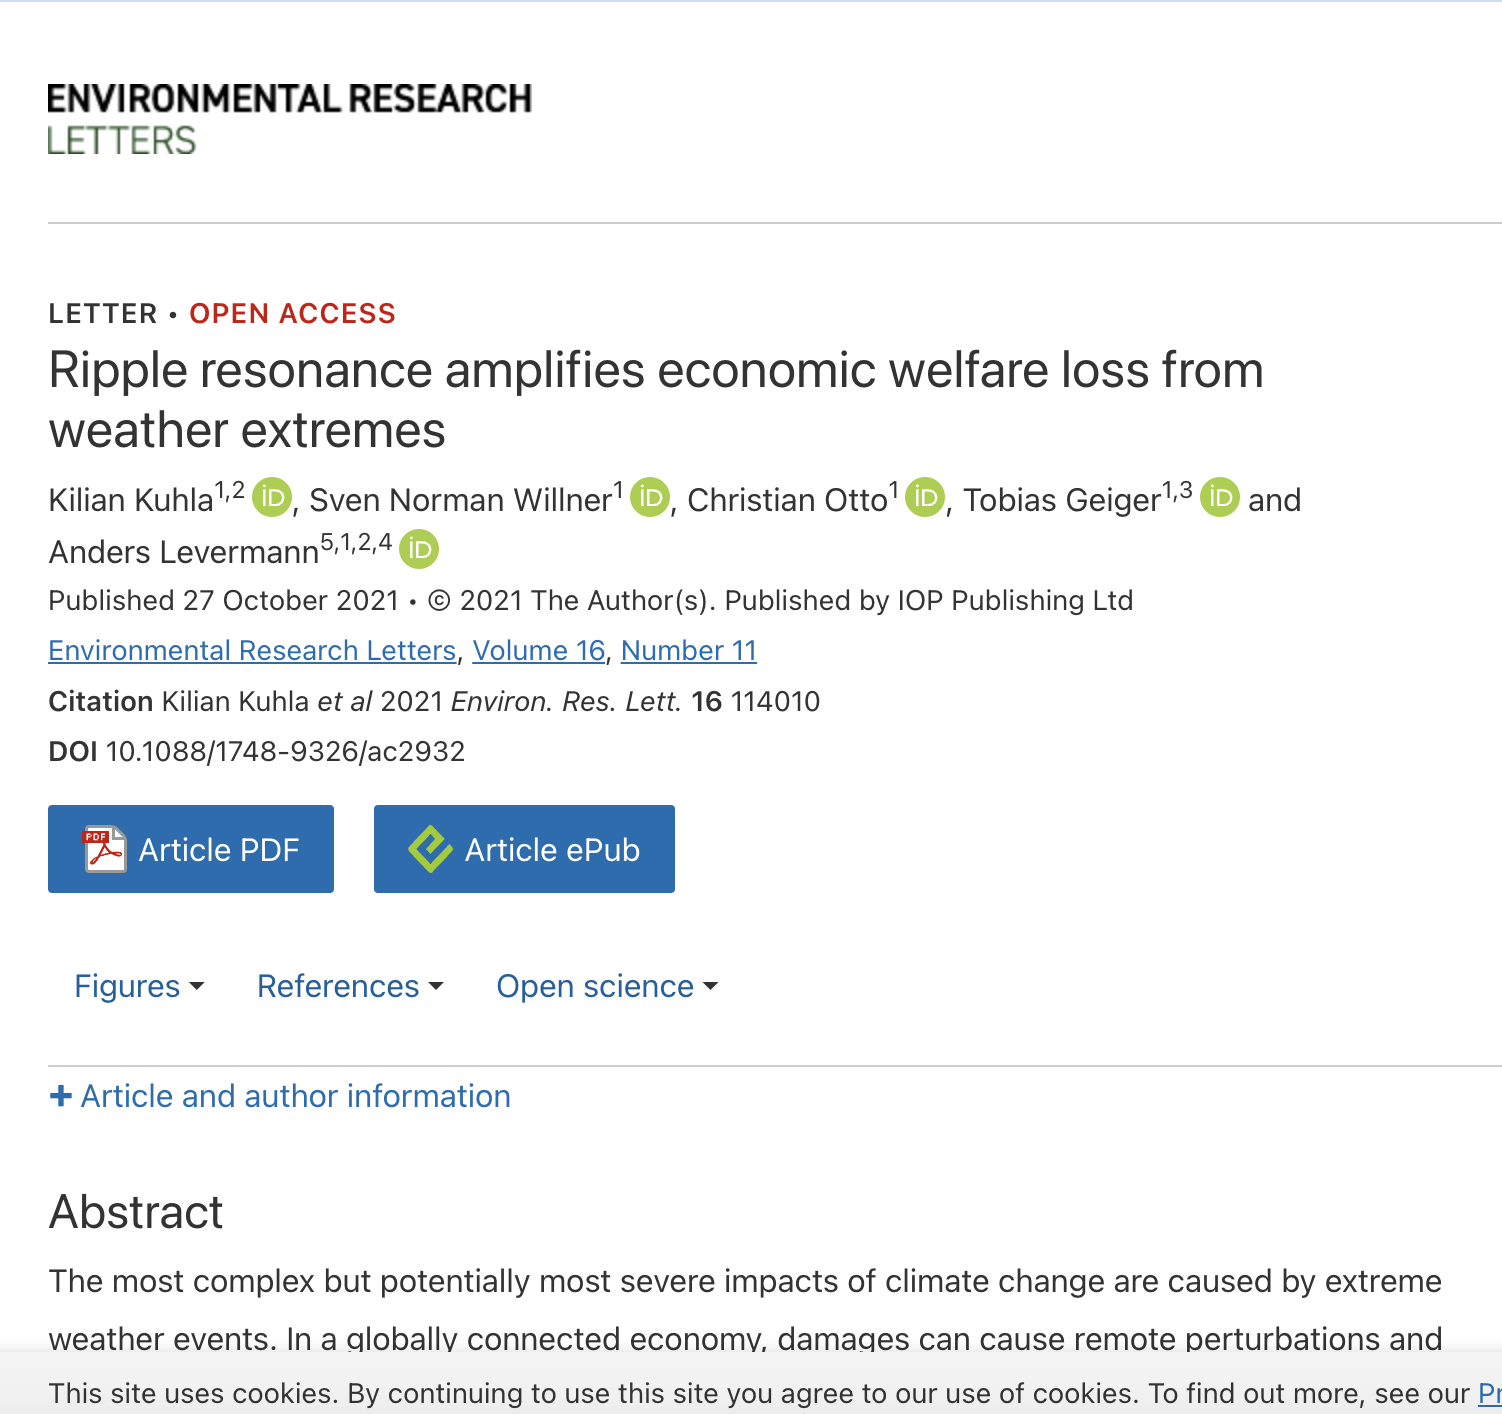 WP6 Global manufacturing chains- Ripple resonance amplifies economic welfare loss from weather extremes